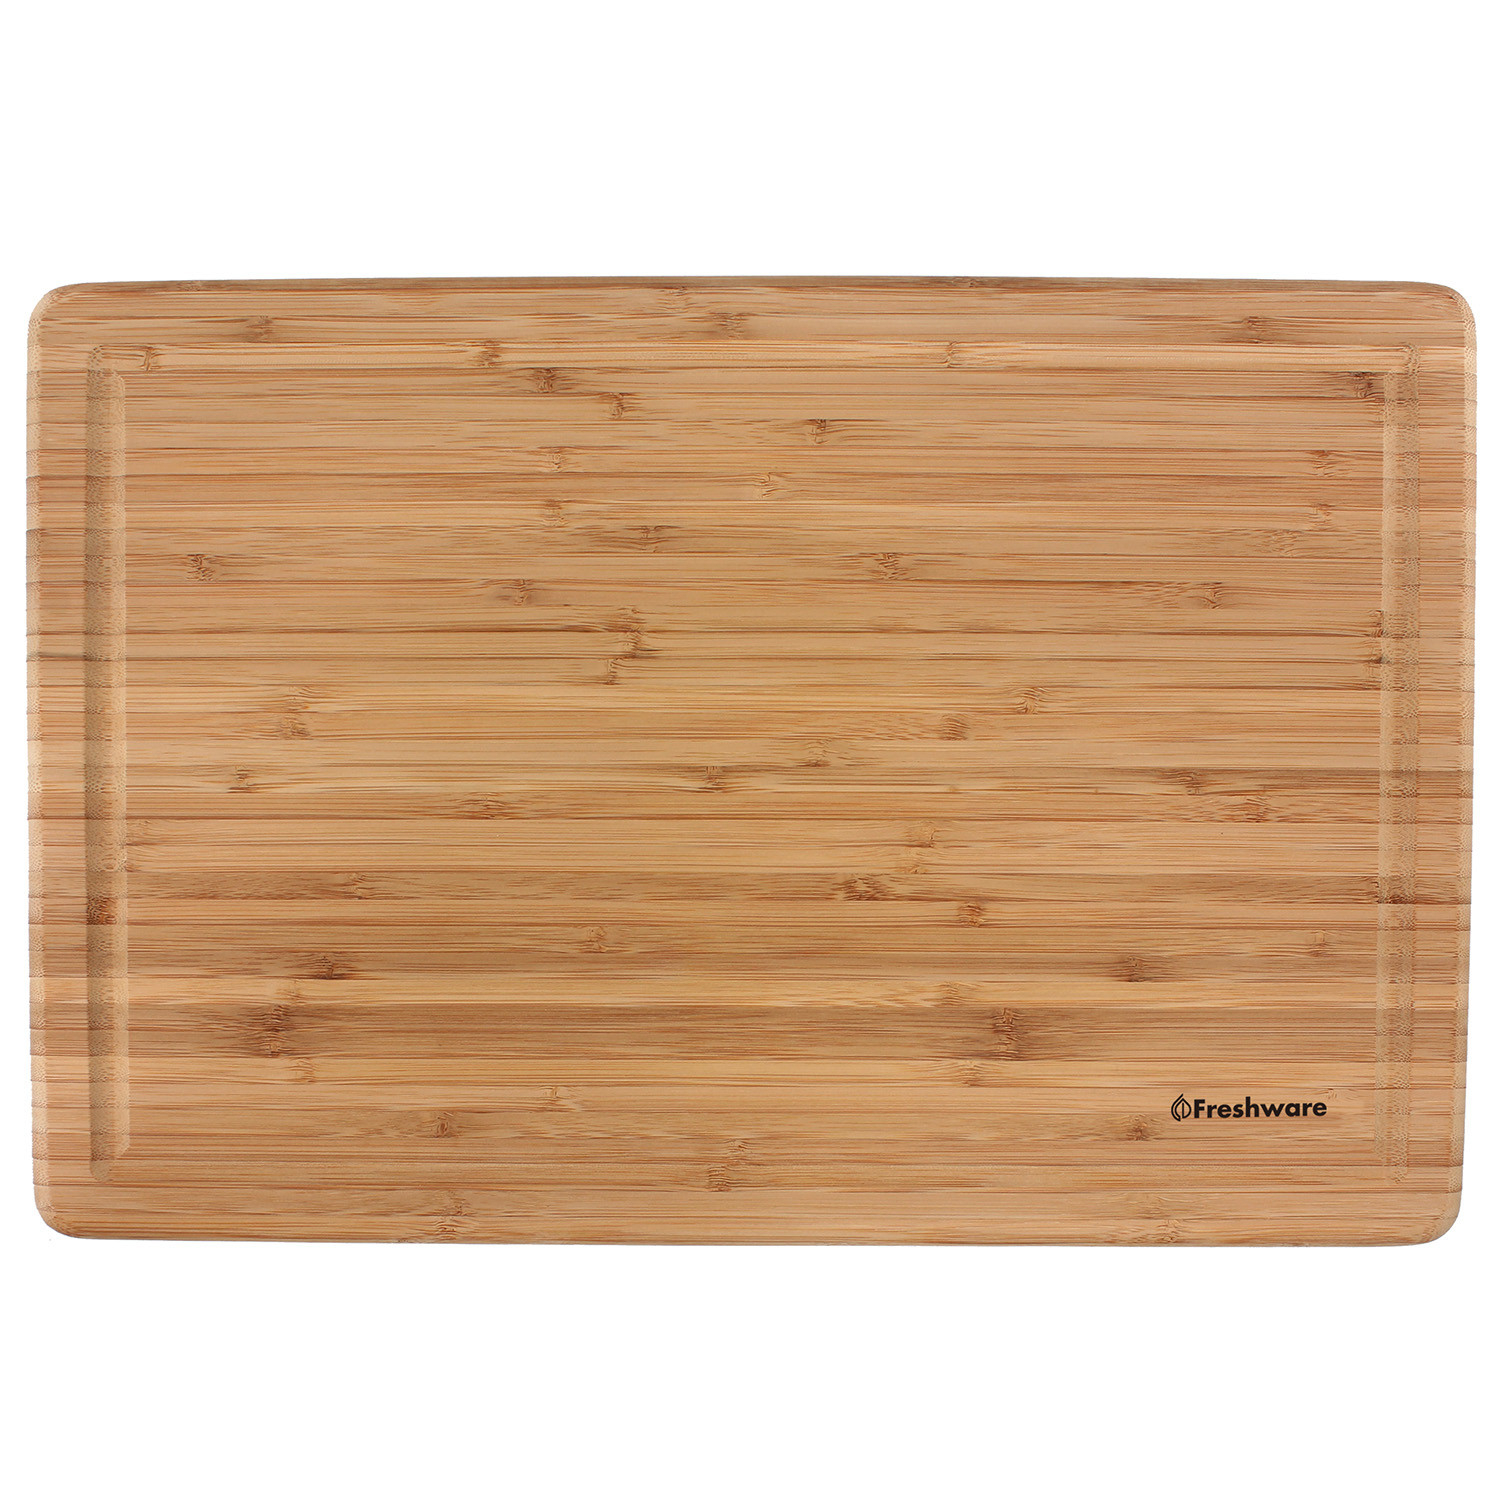 Freshware Bamboo Cutting Board with Juice Groove, Extra Large